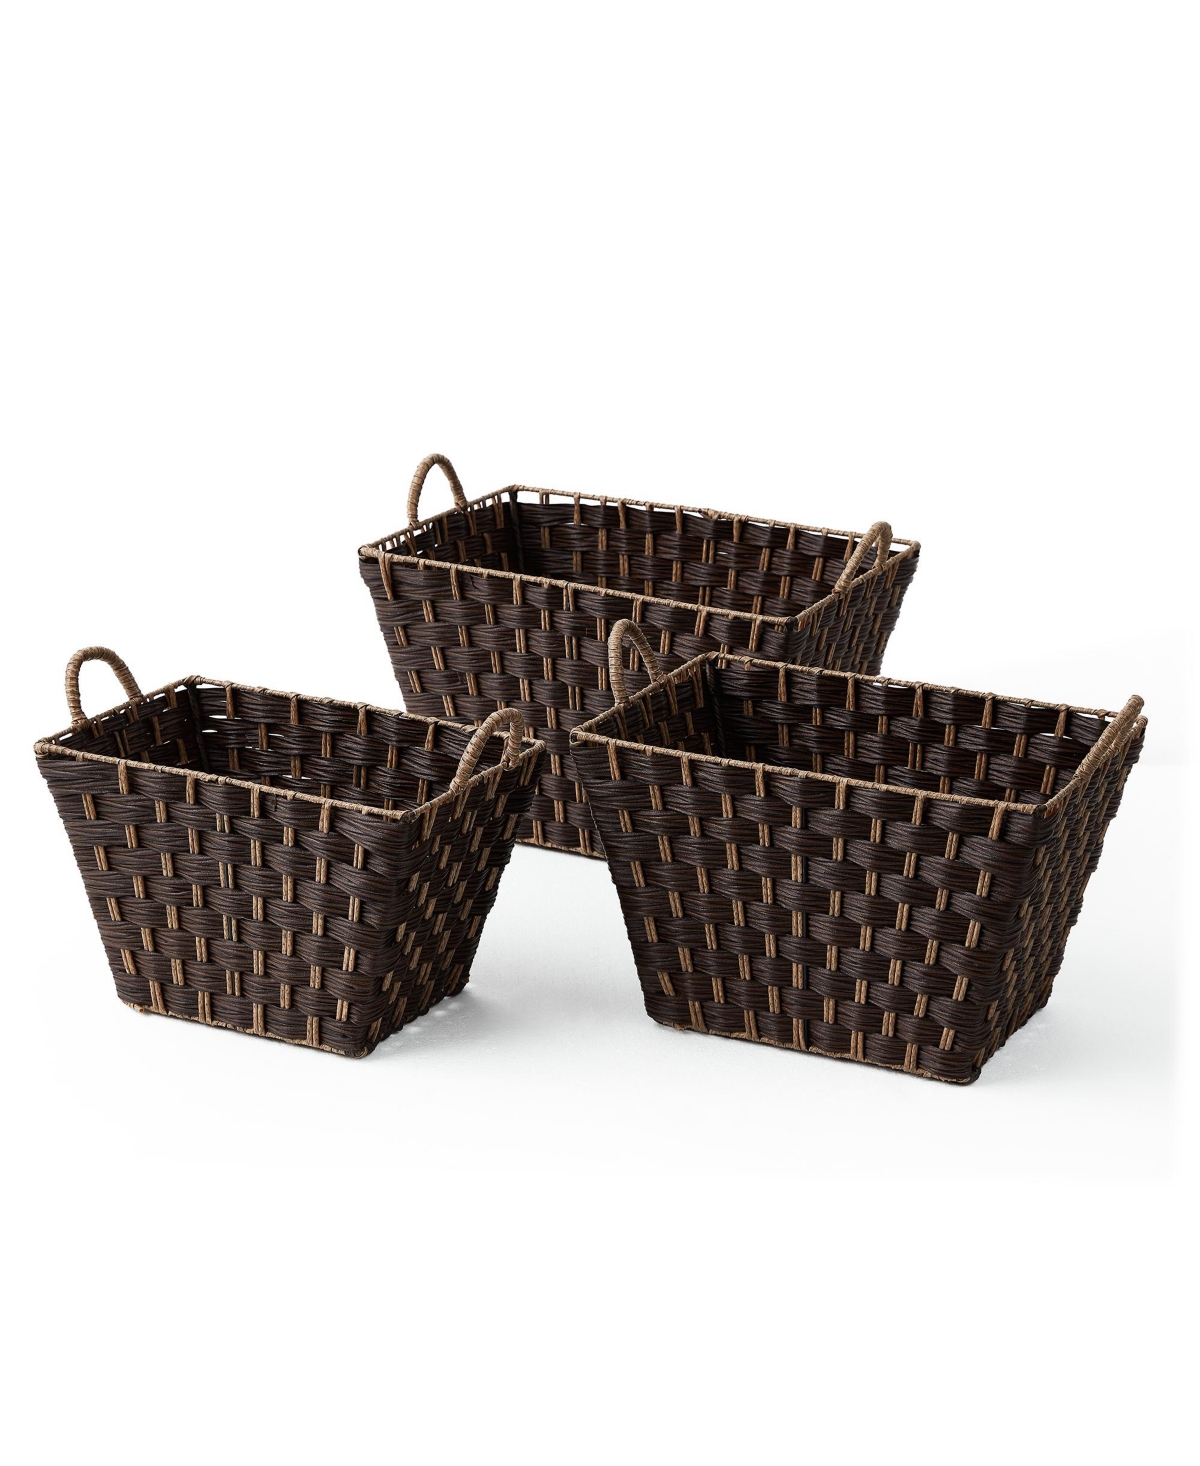 Baum 3 Piece Rectangular Faux Wicker Storage Bin Set In Combo Weave With Cut Out Handles In Brown